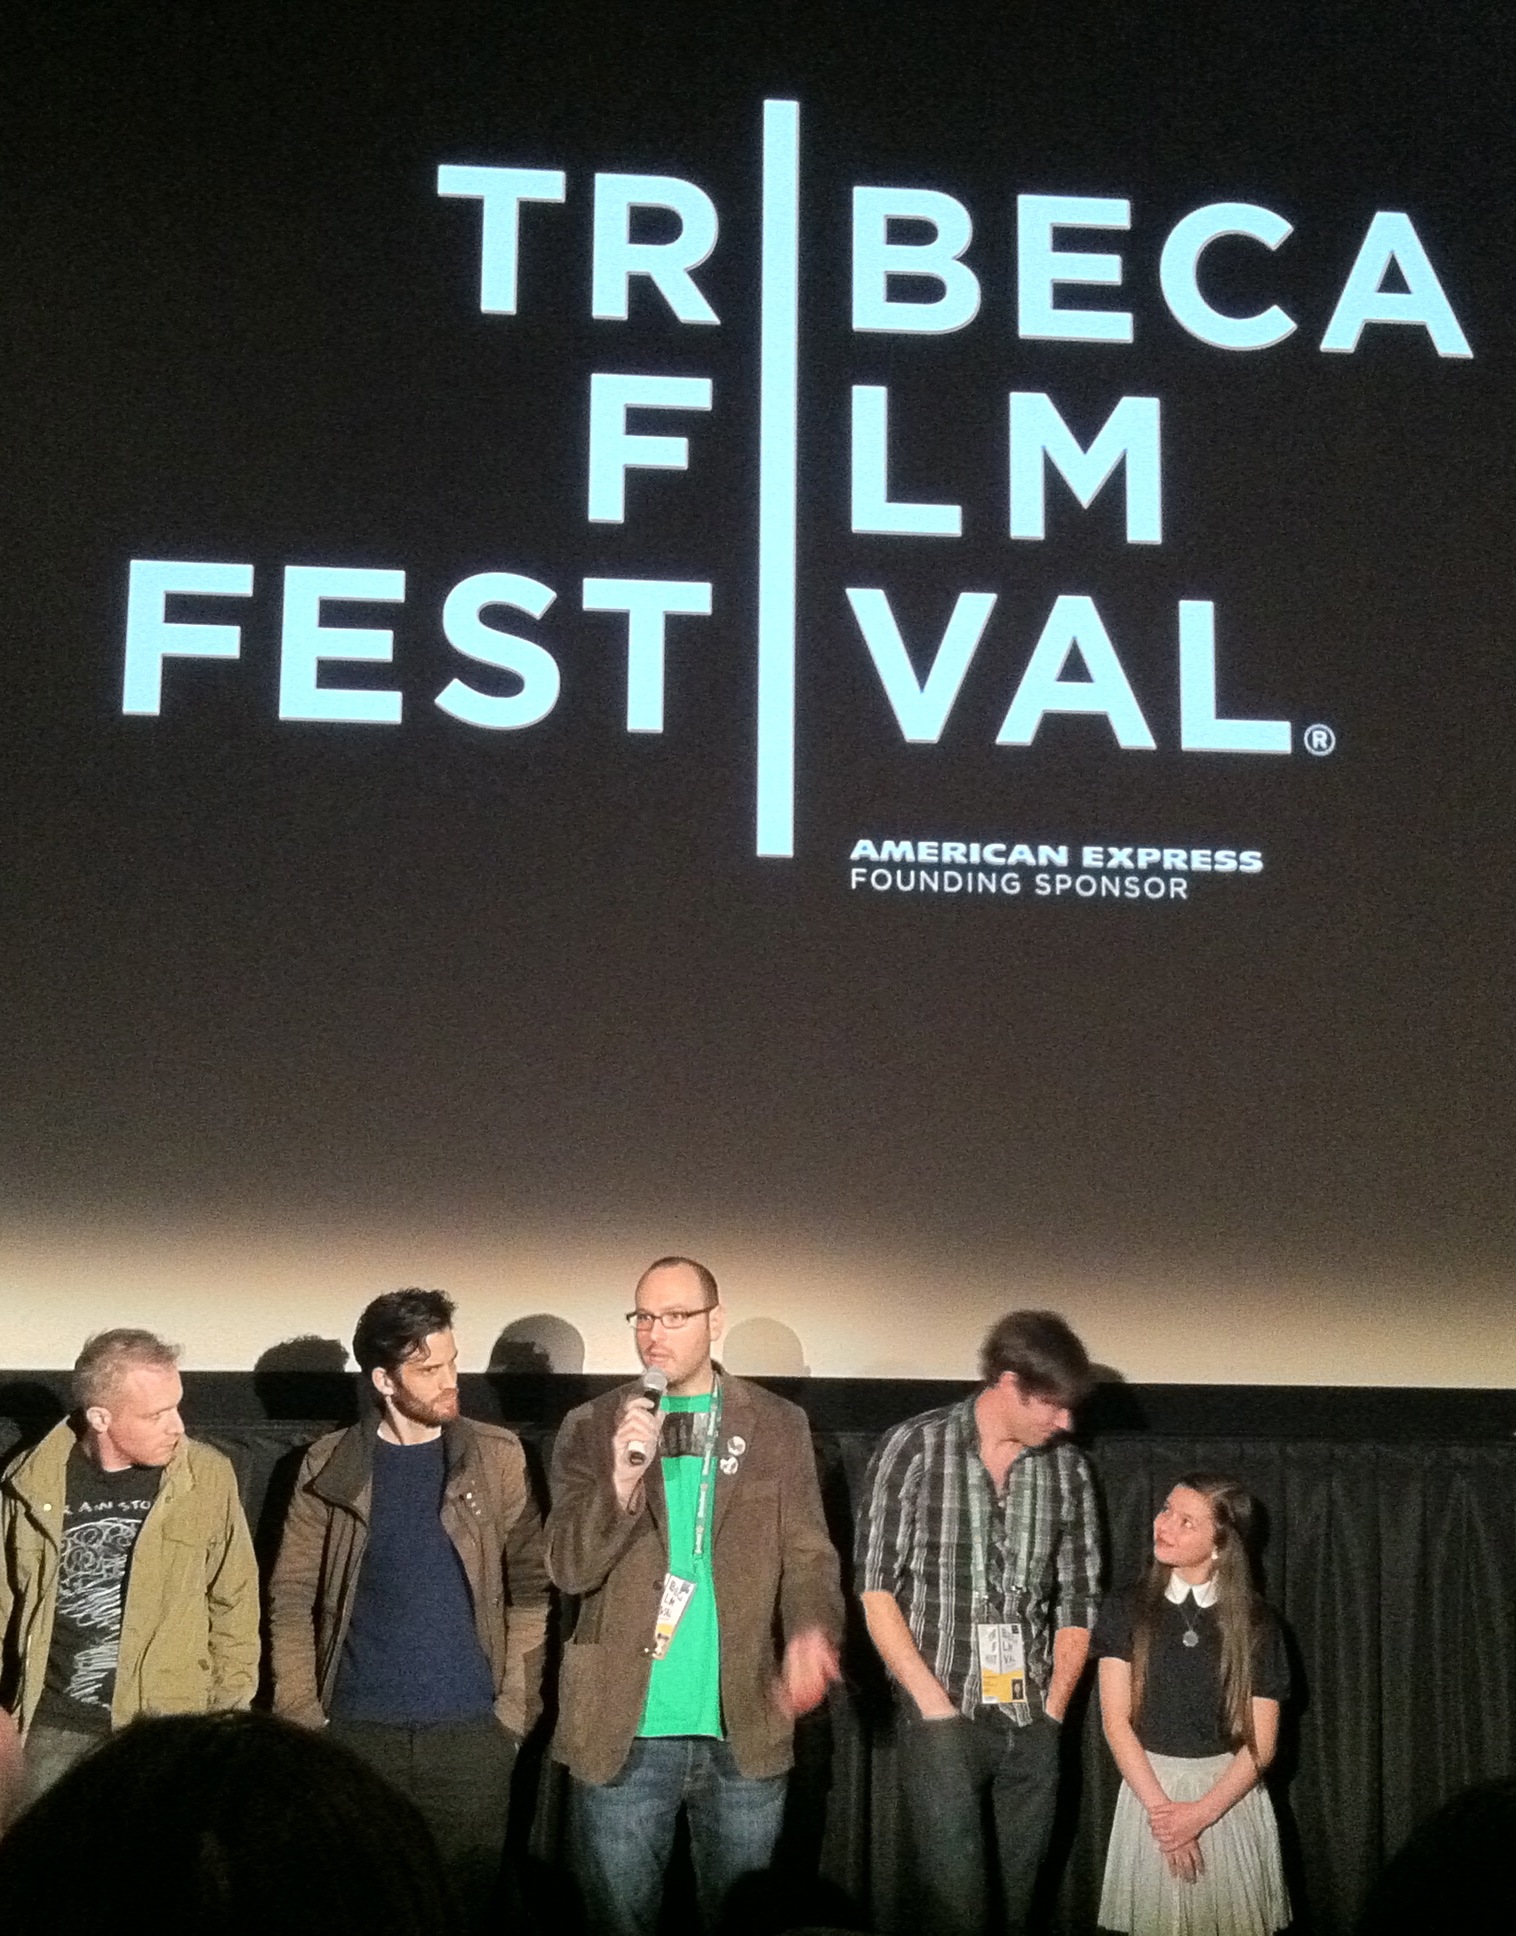 Fátima Ptacek with director Shawn Christensen during Q&A following the screening of CURFEW at the TriBeCa Film Festival - April 23, 2012